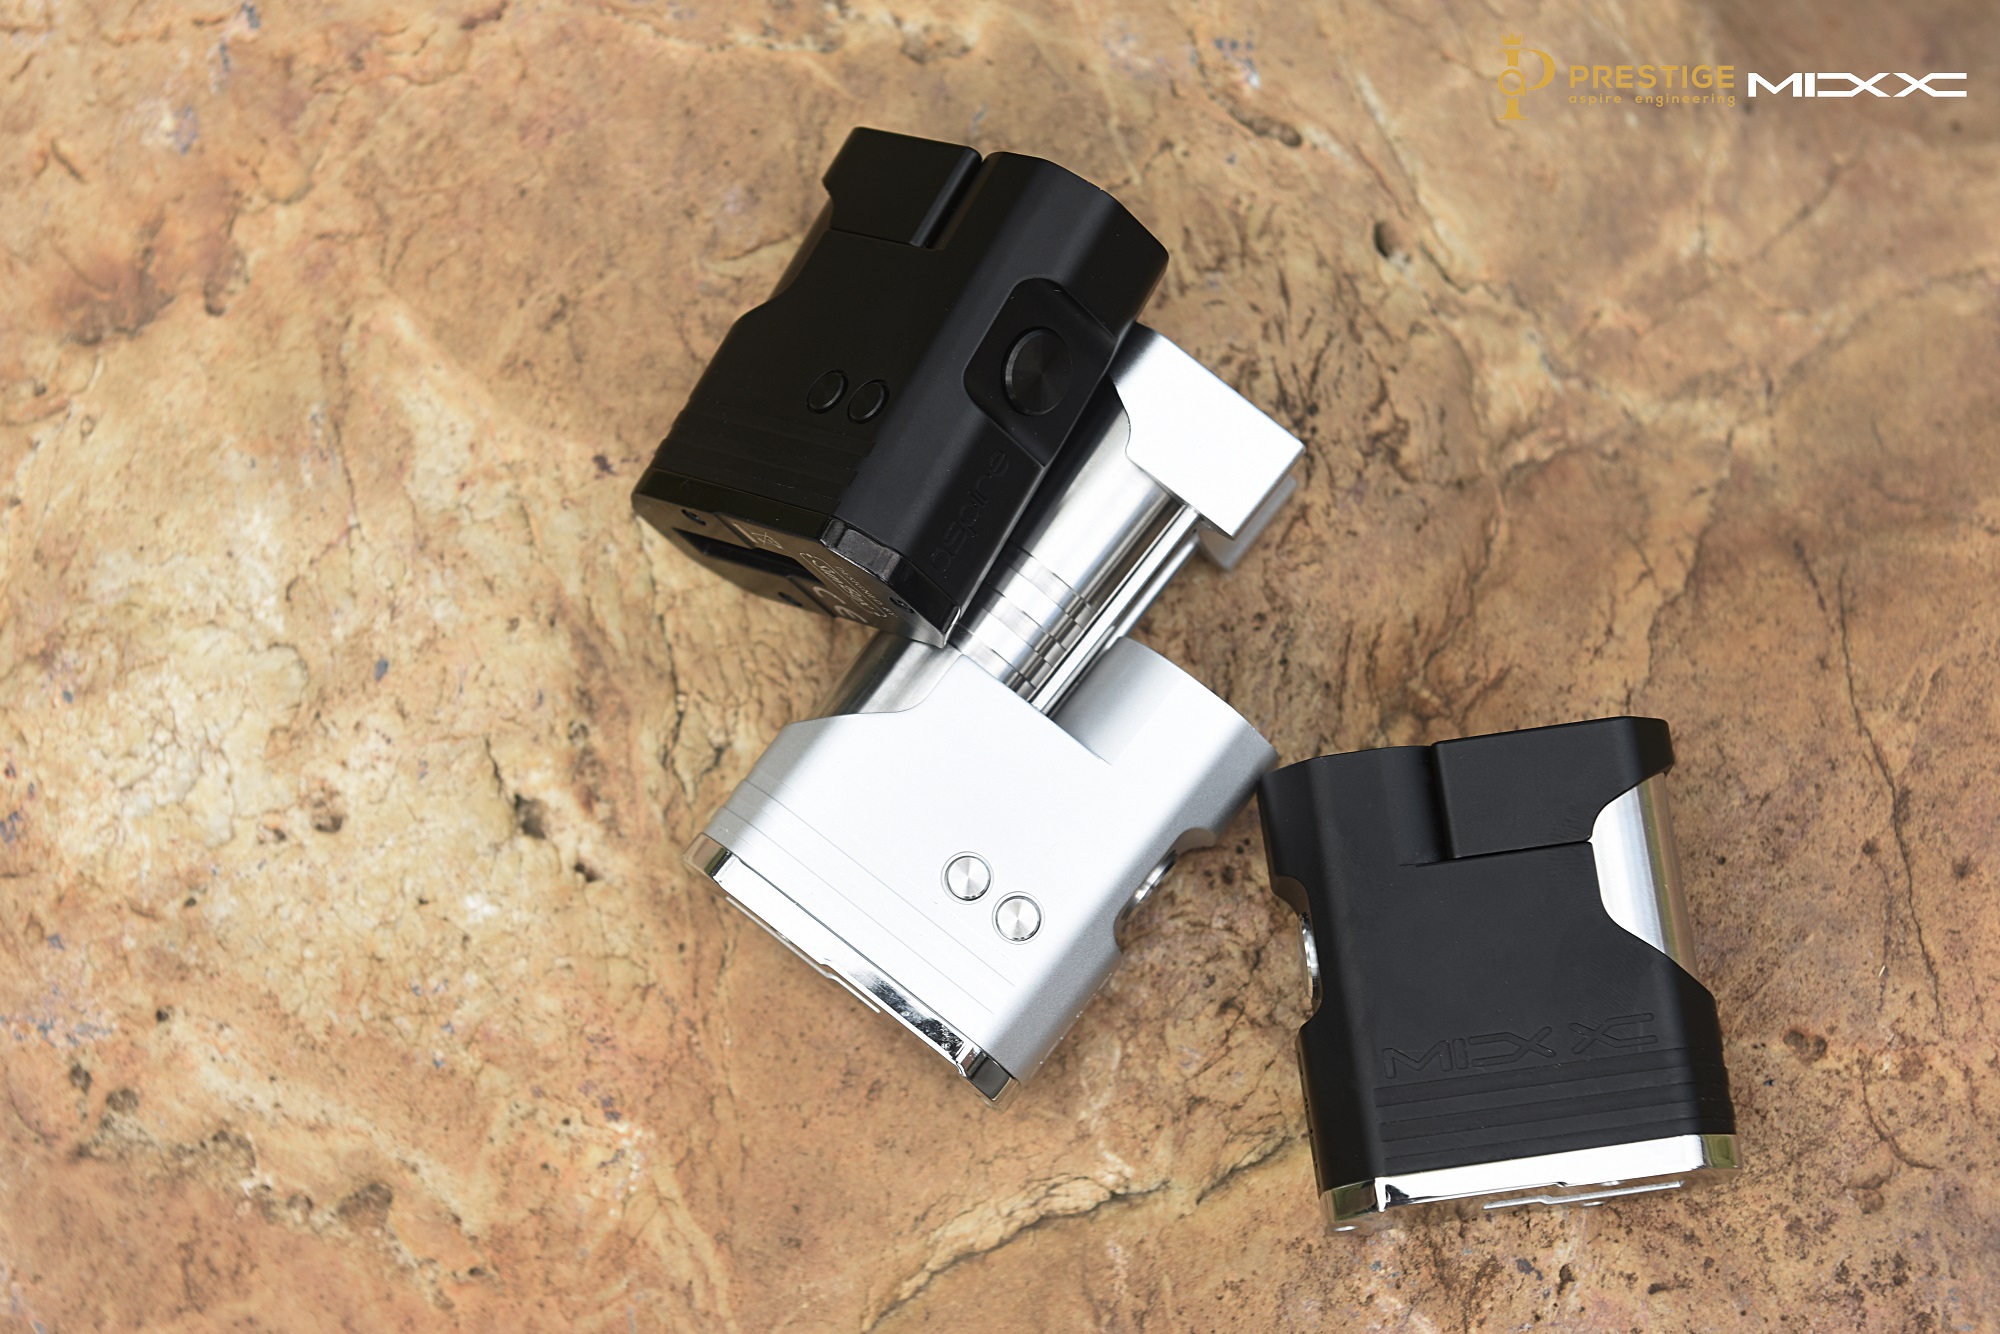 The Aspire MIXX mod comes in three color options. 